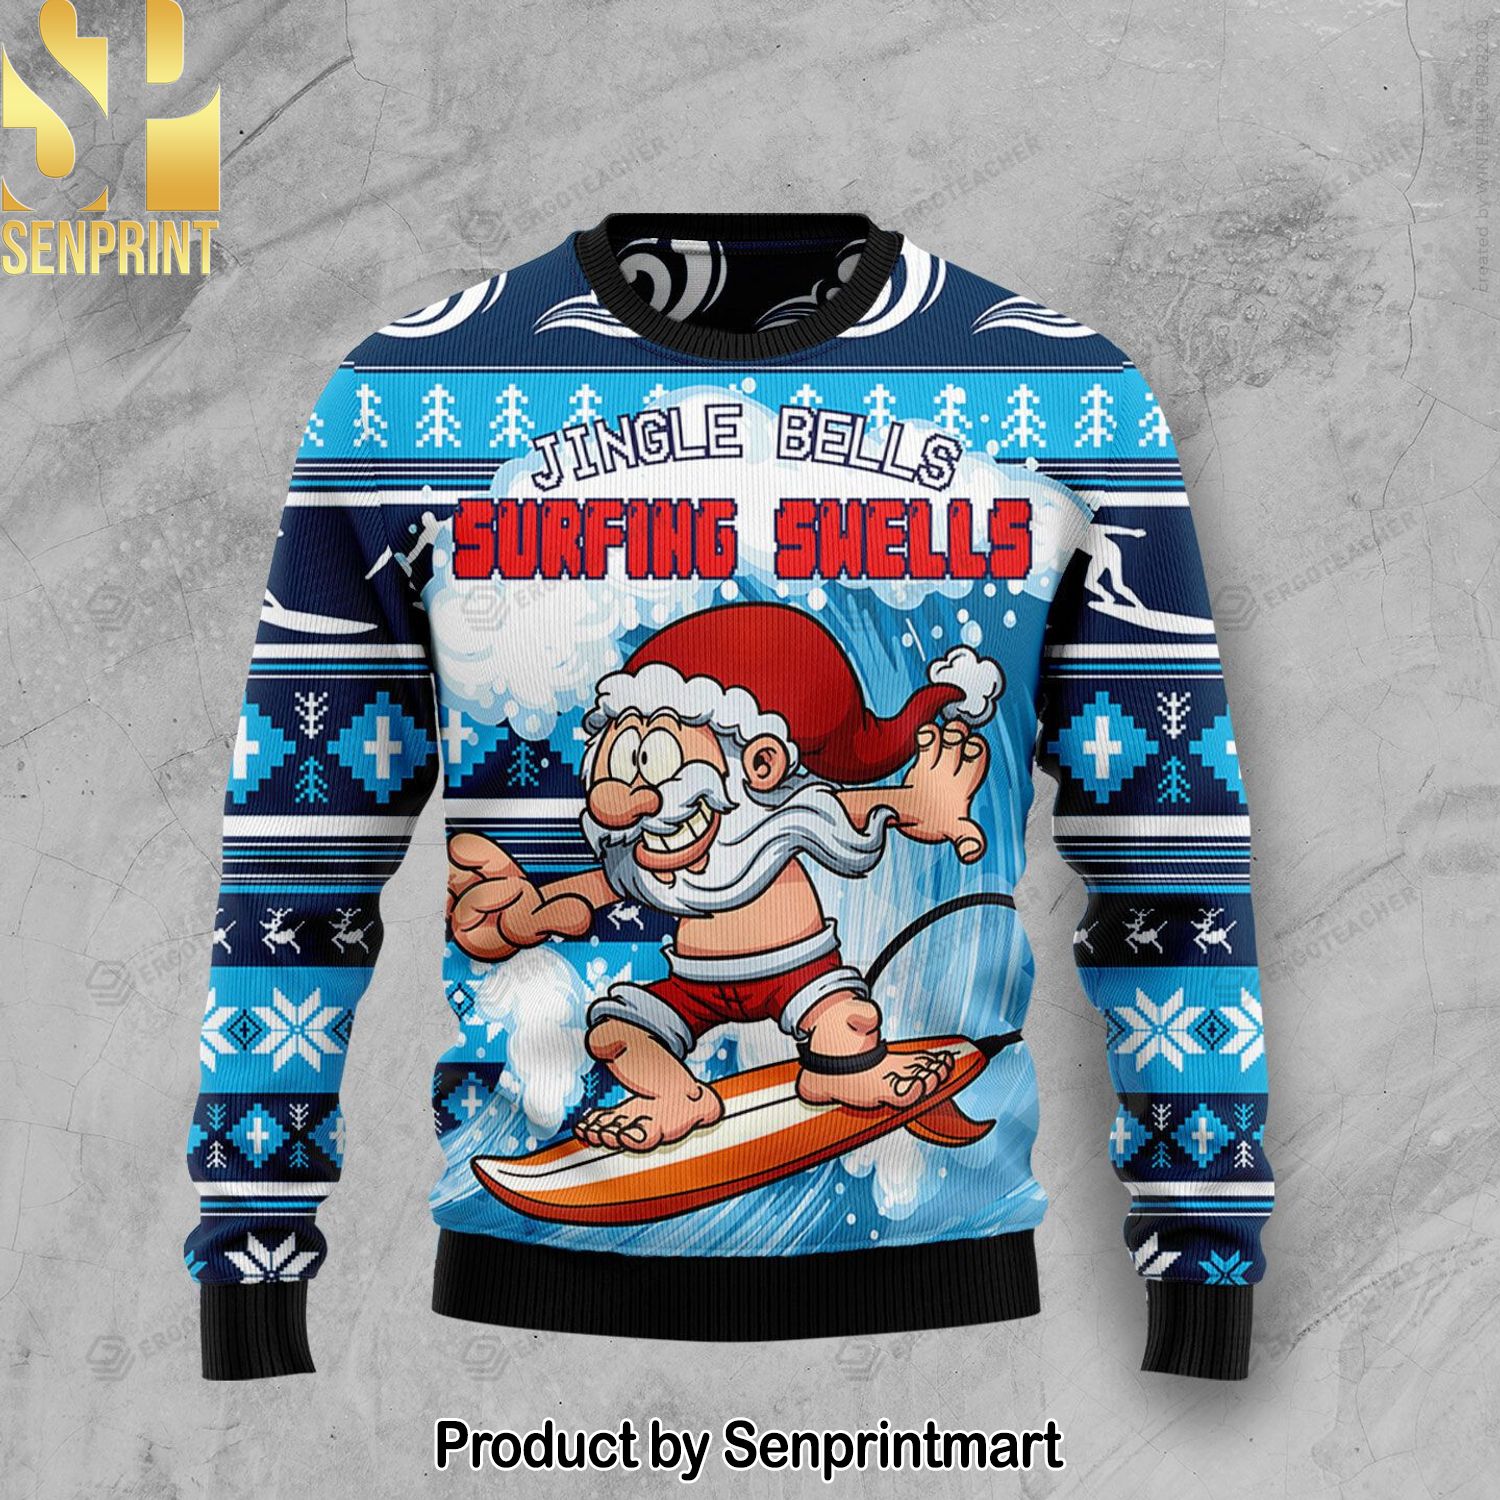 Jingle Bells Surfing Swells Ugly Xmas Wool Knitted Sweater